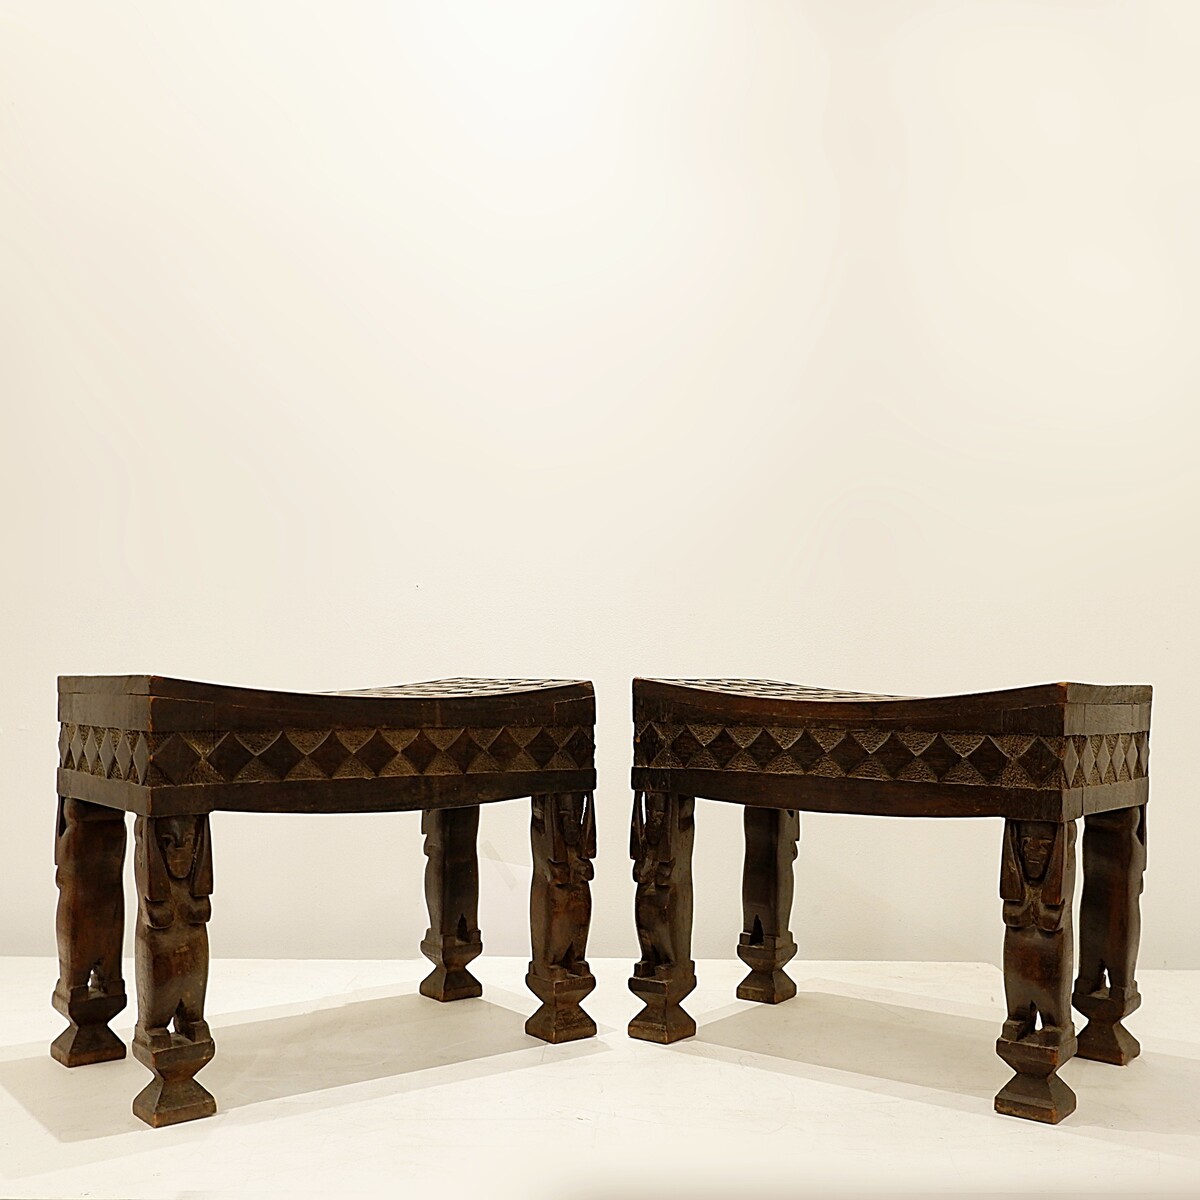 Pair of African carved wooden stools